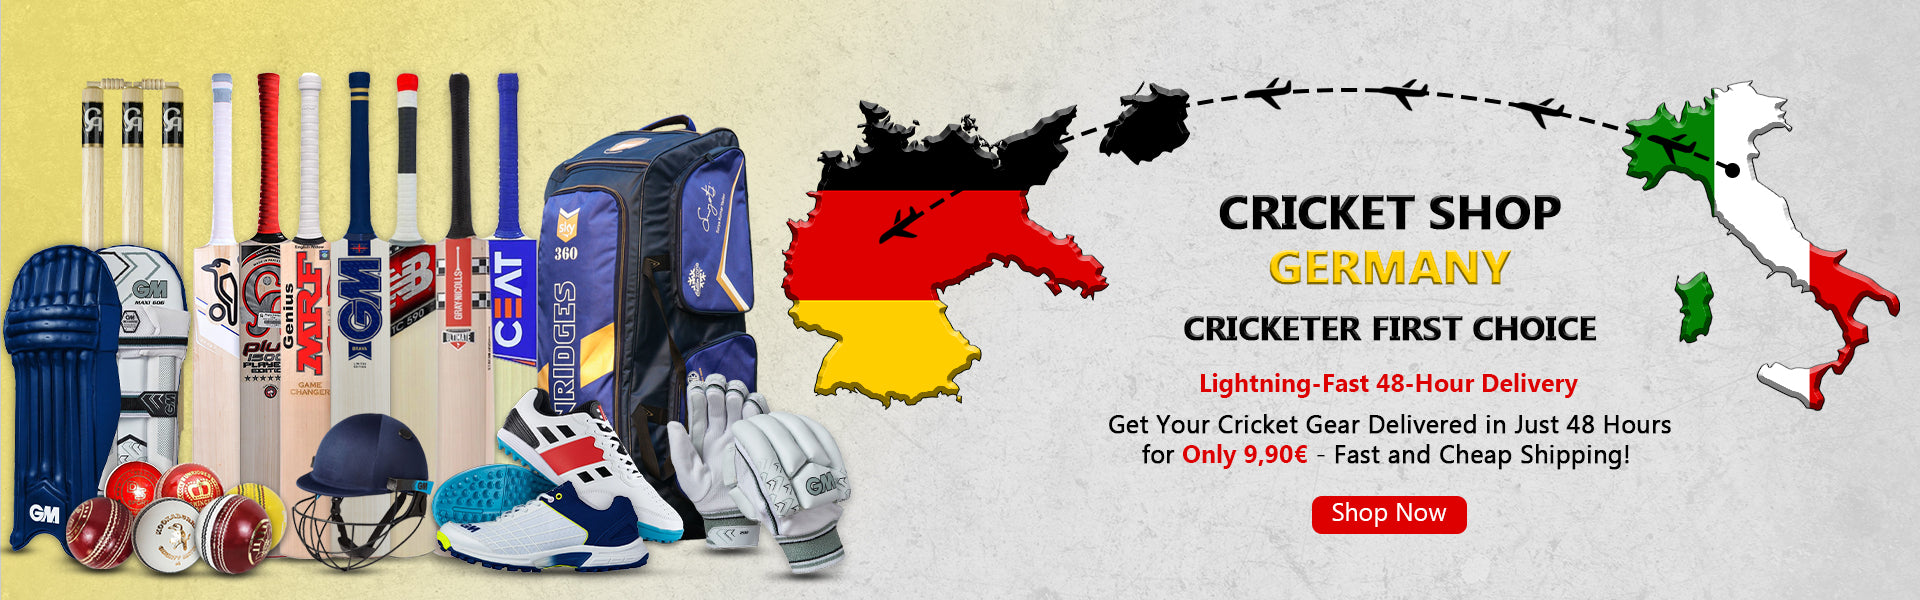 Cricket Shop Germany | Cricketer first Choice